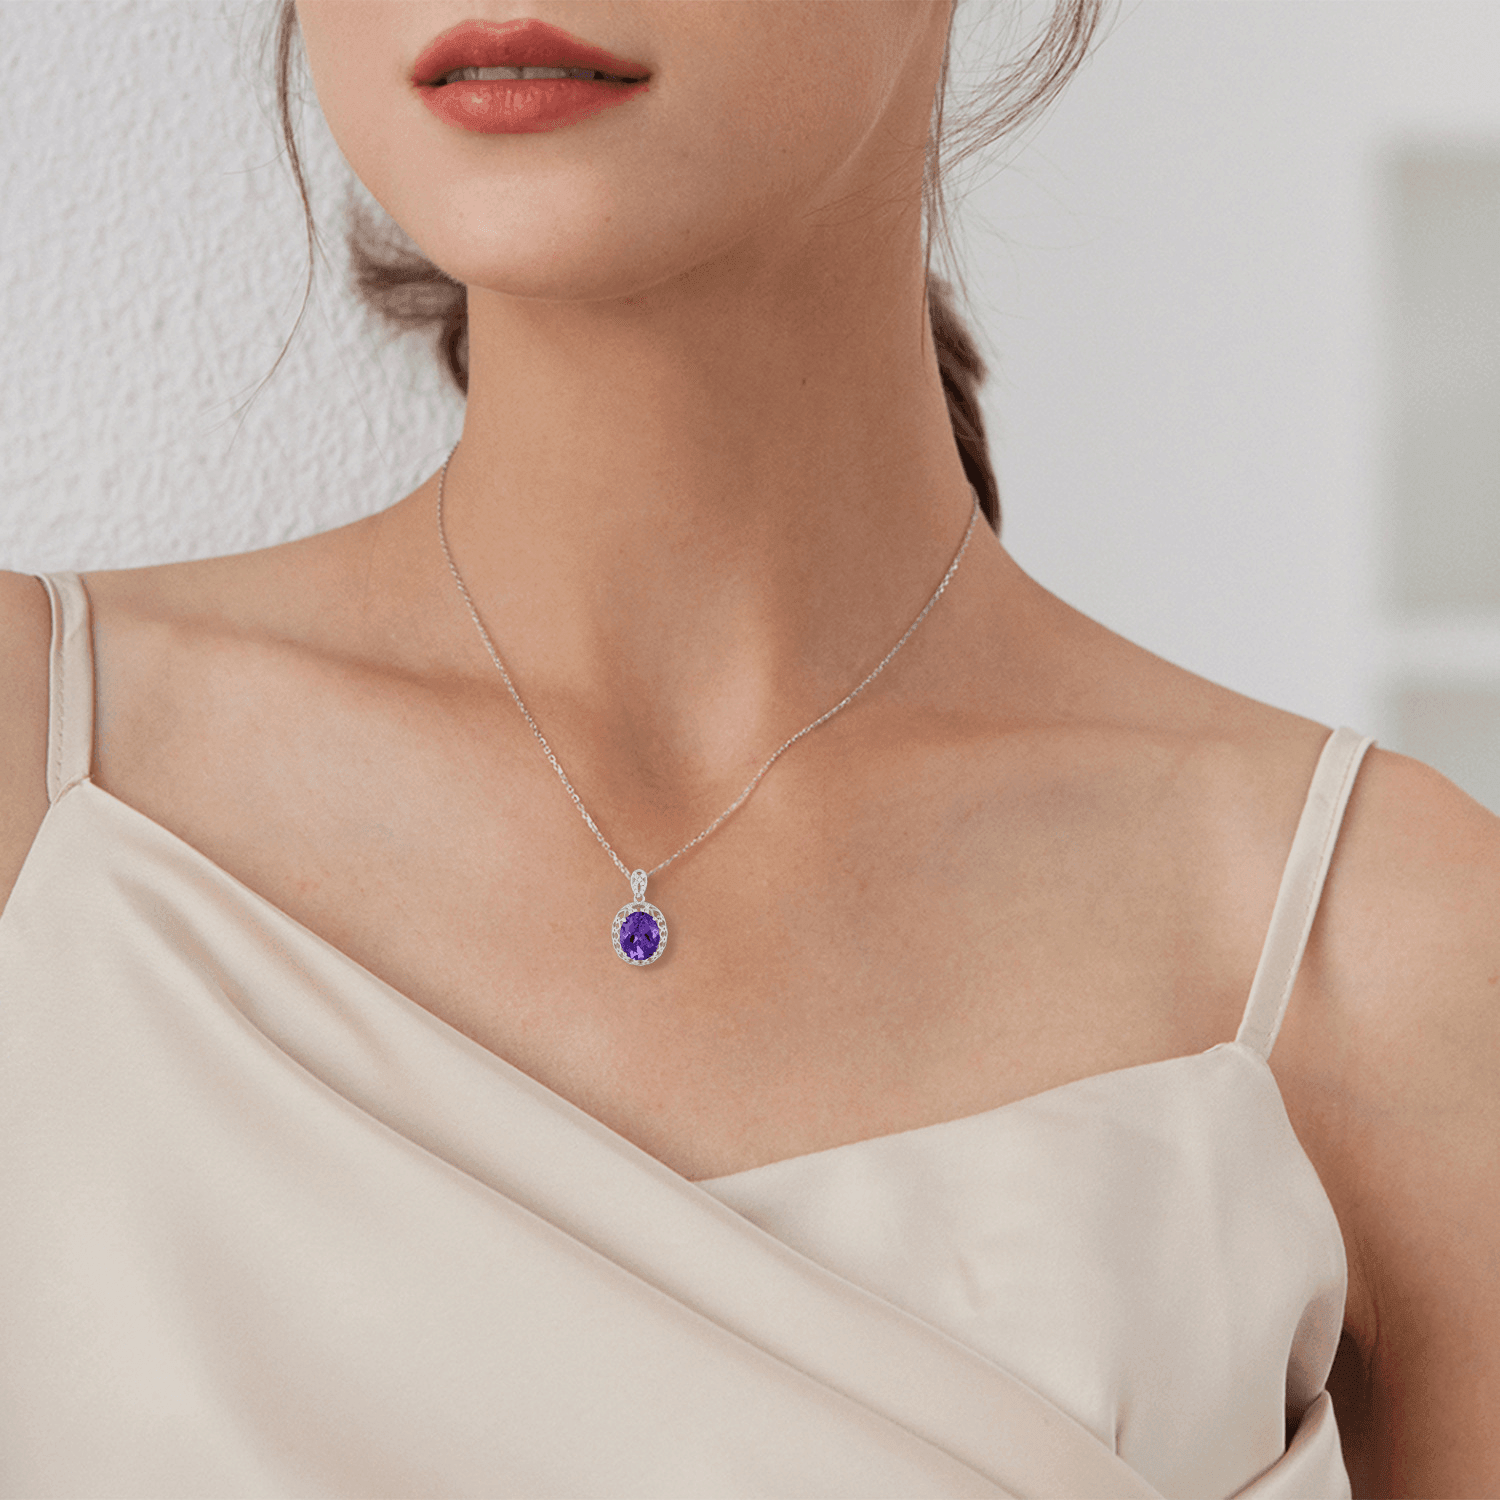 High-grade Amethyst Pendant Necklace in 2023 | High-grade Amethyst Pendant Necklace - undefined | Amethyst Pendant Necklace, High-grade Amethyst Necklace, Sterling Silver s925 necklace | From Hunny Life | hunnylife.com